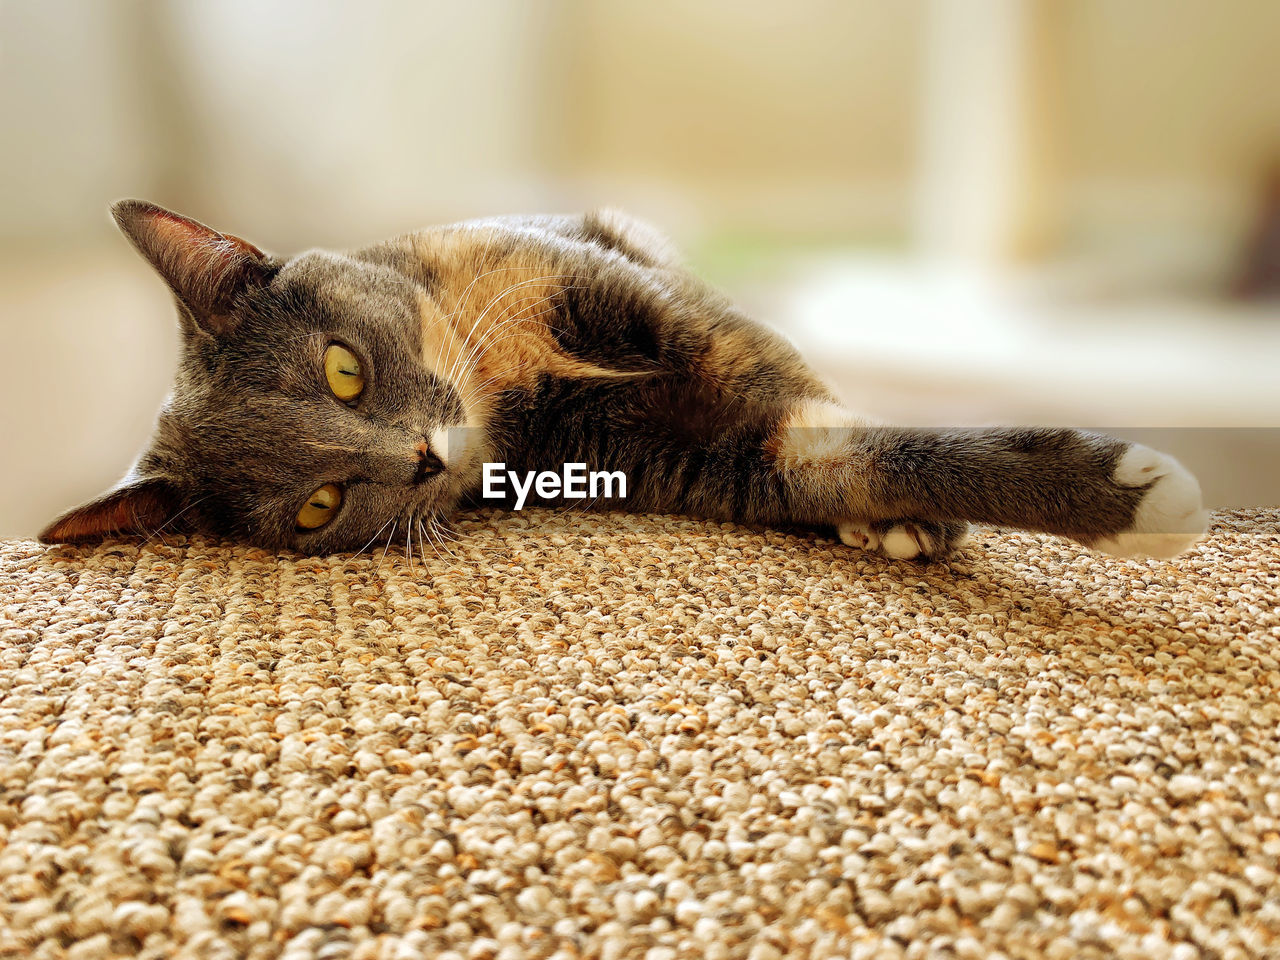 CLOSE-UP OF CAT RELAXING ON RUG